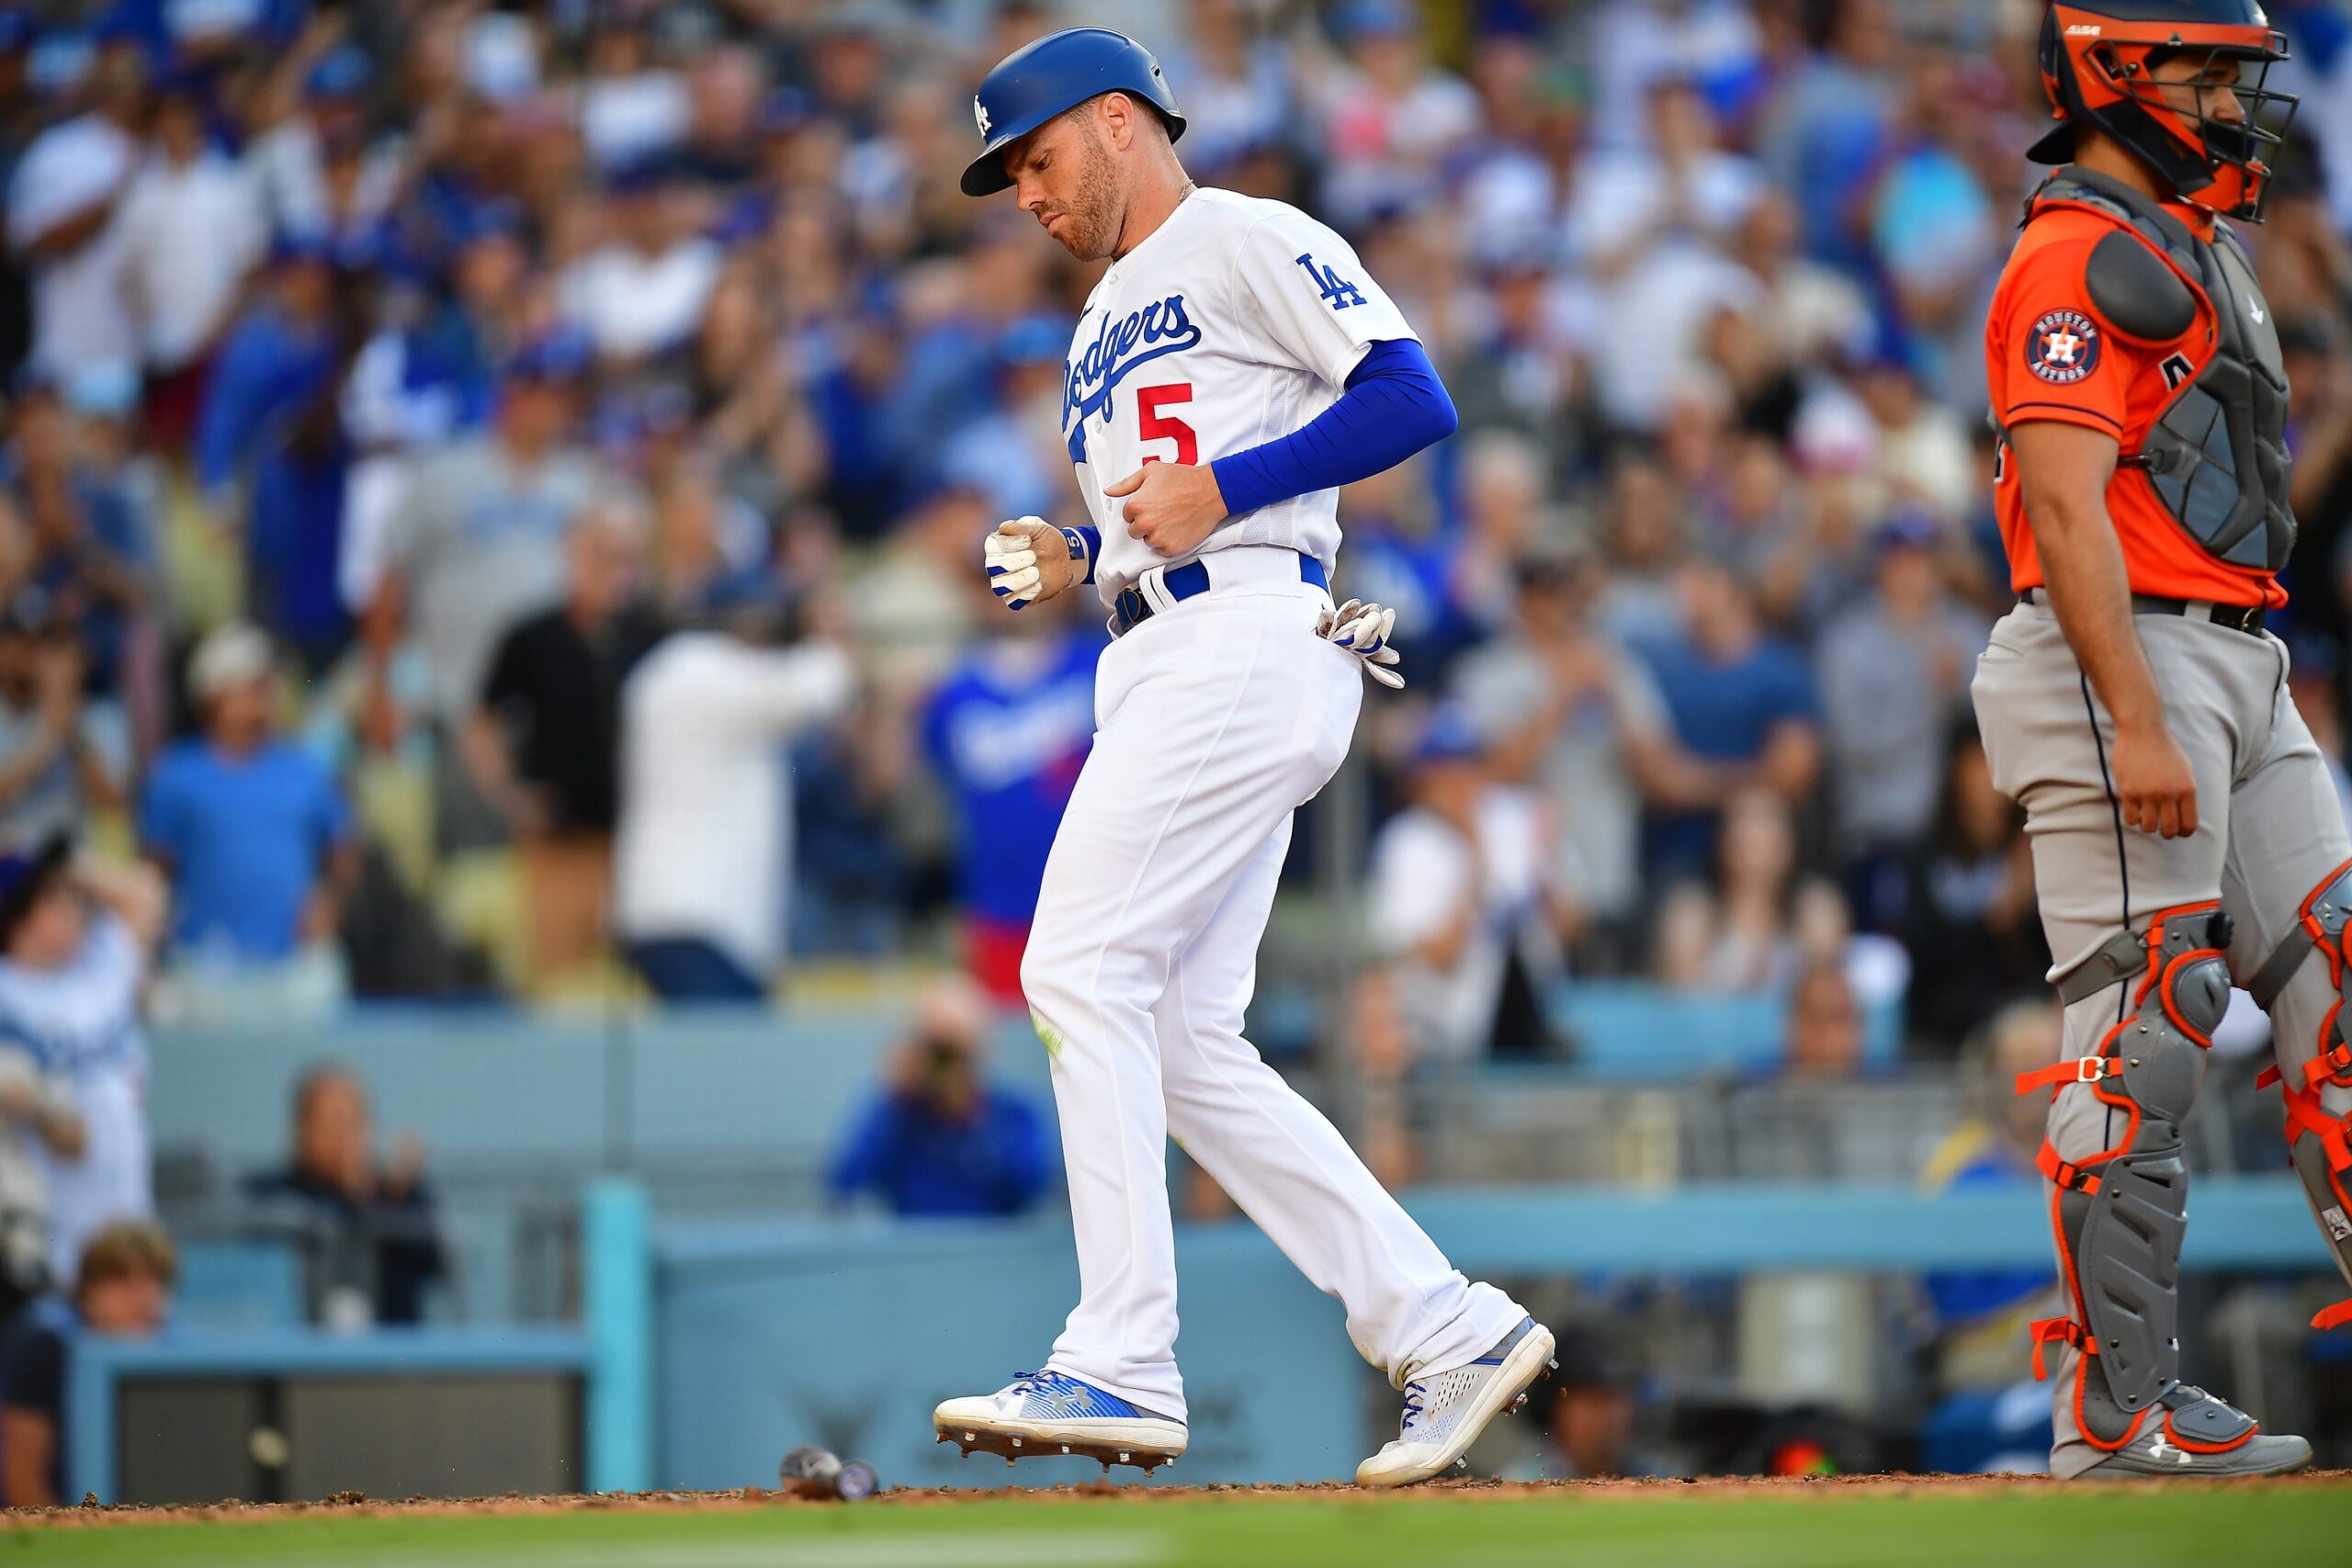 Dodgers lose to Astros in extra innings as Freddie Freeman reaches